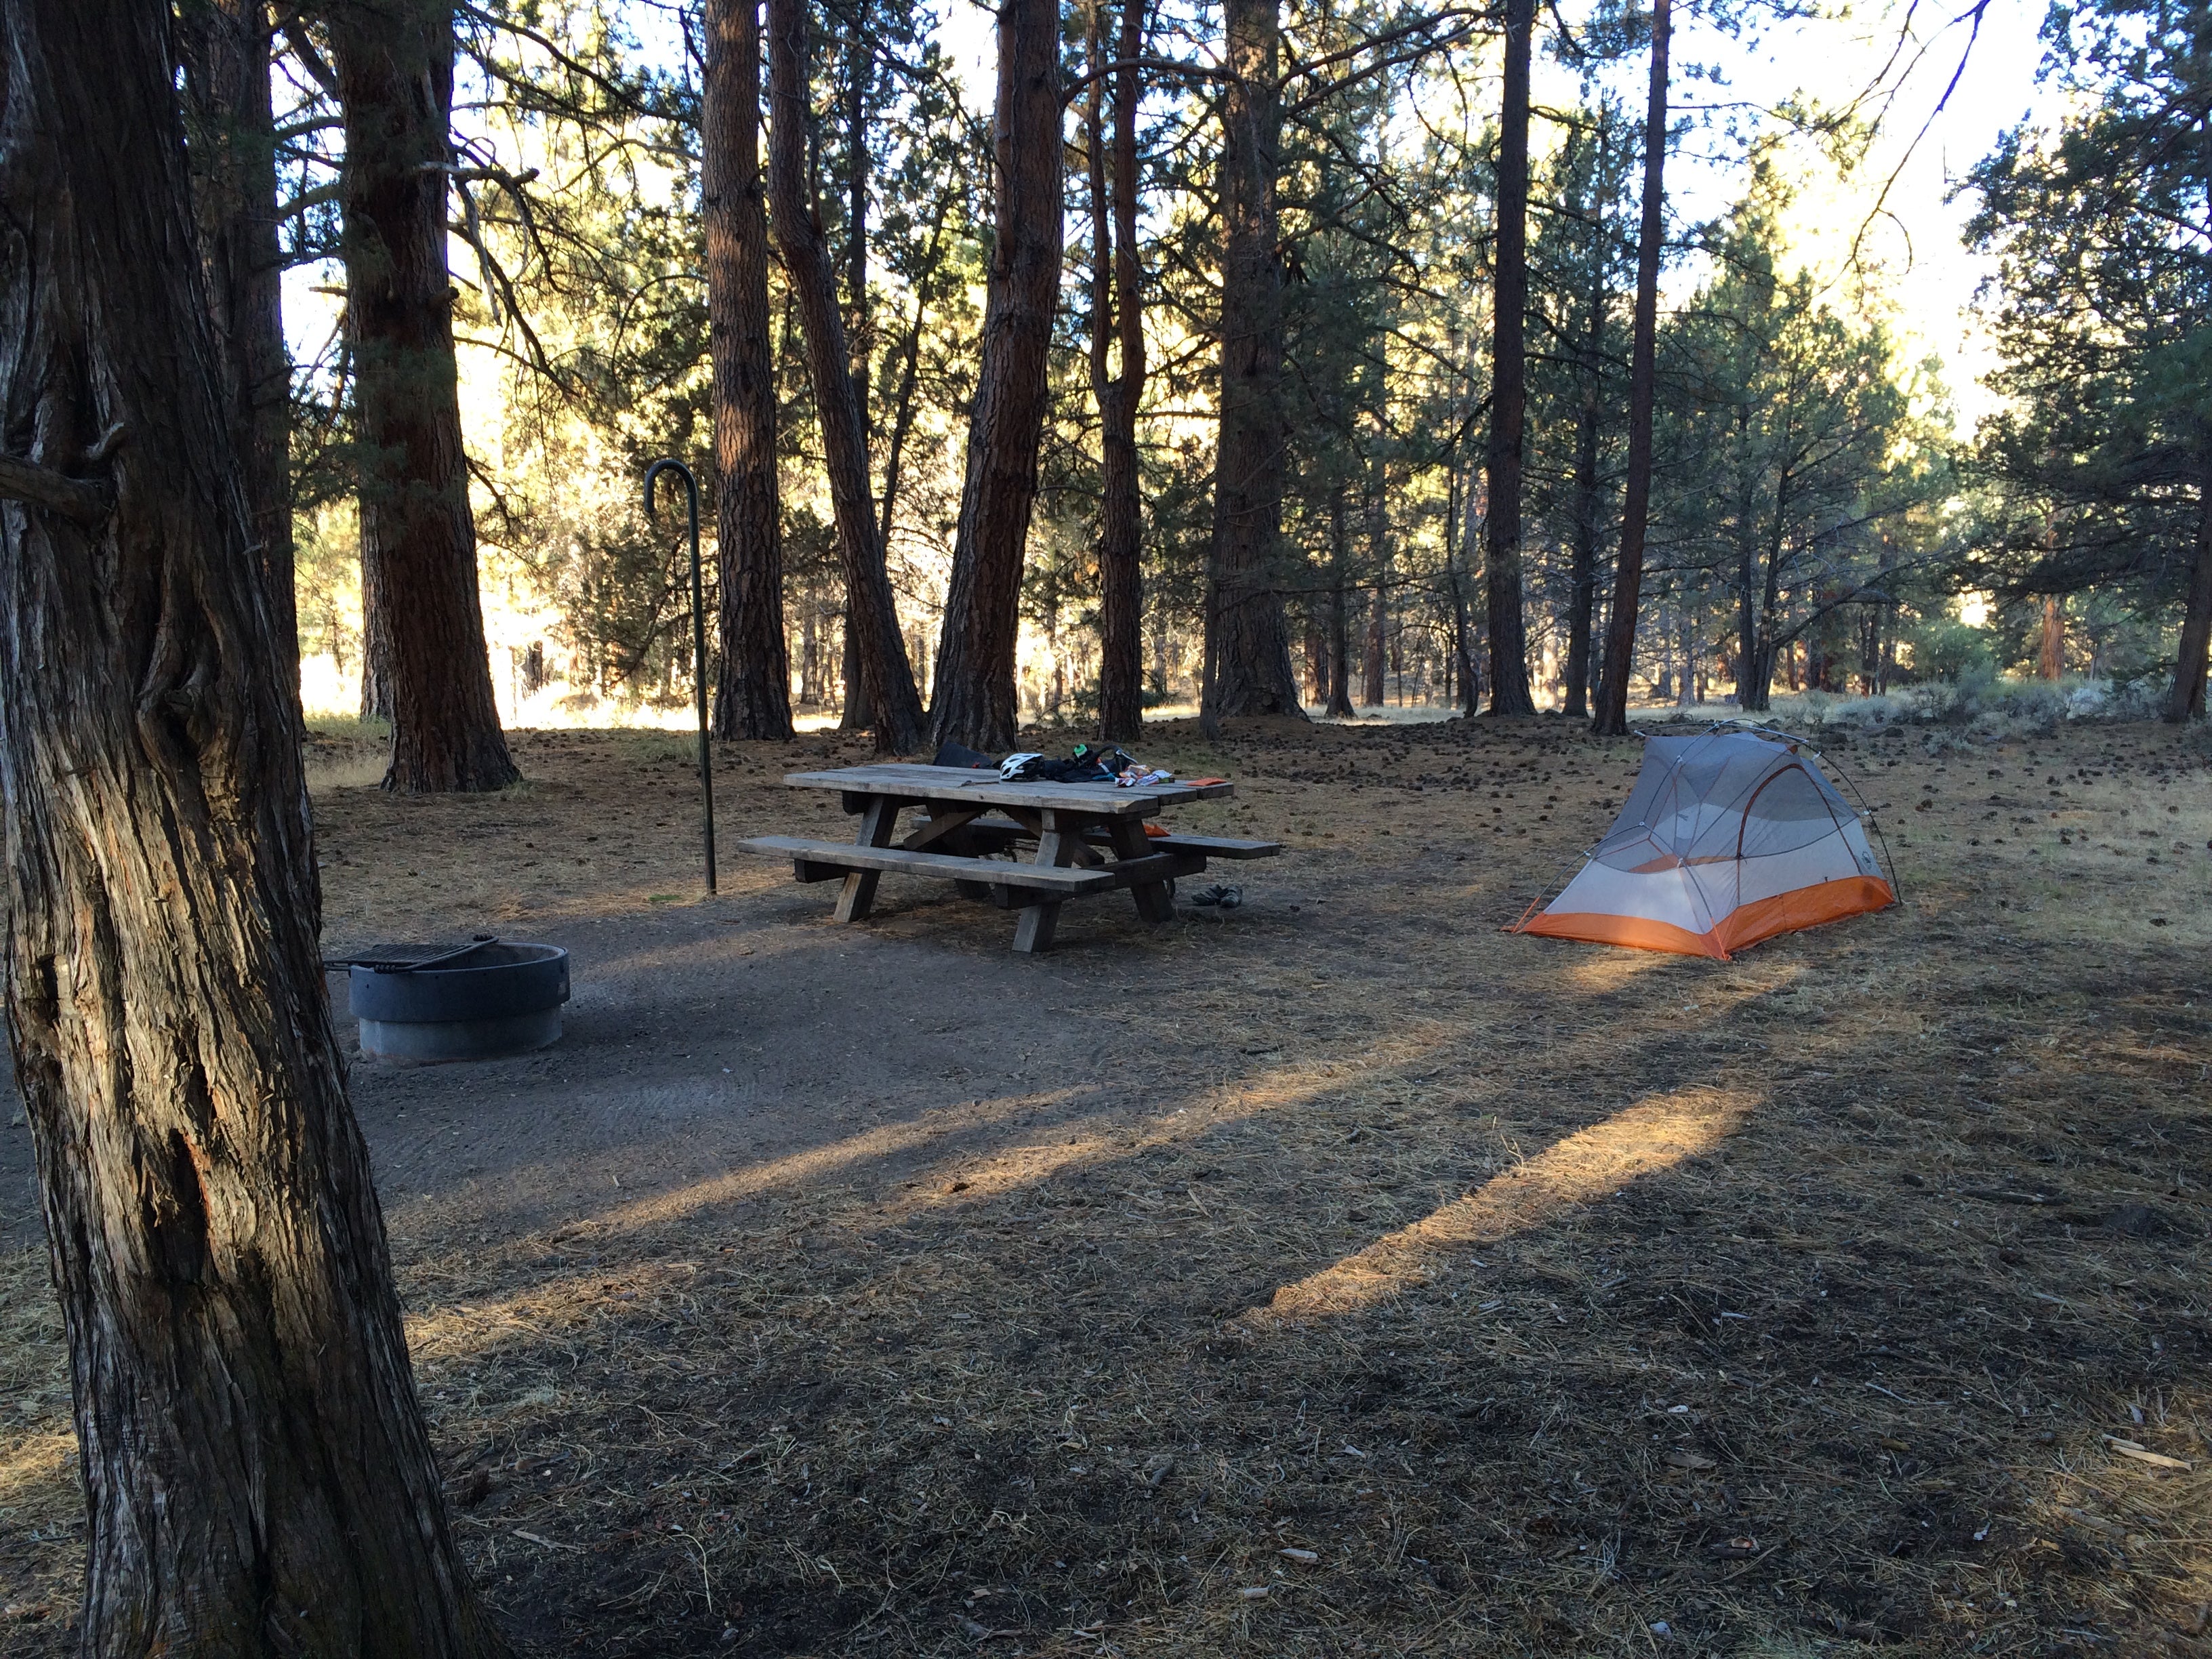 A nice open campsite, with trees.